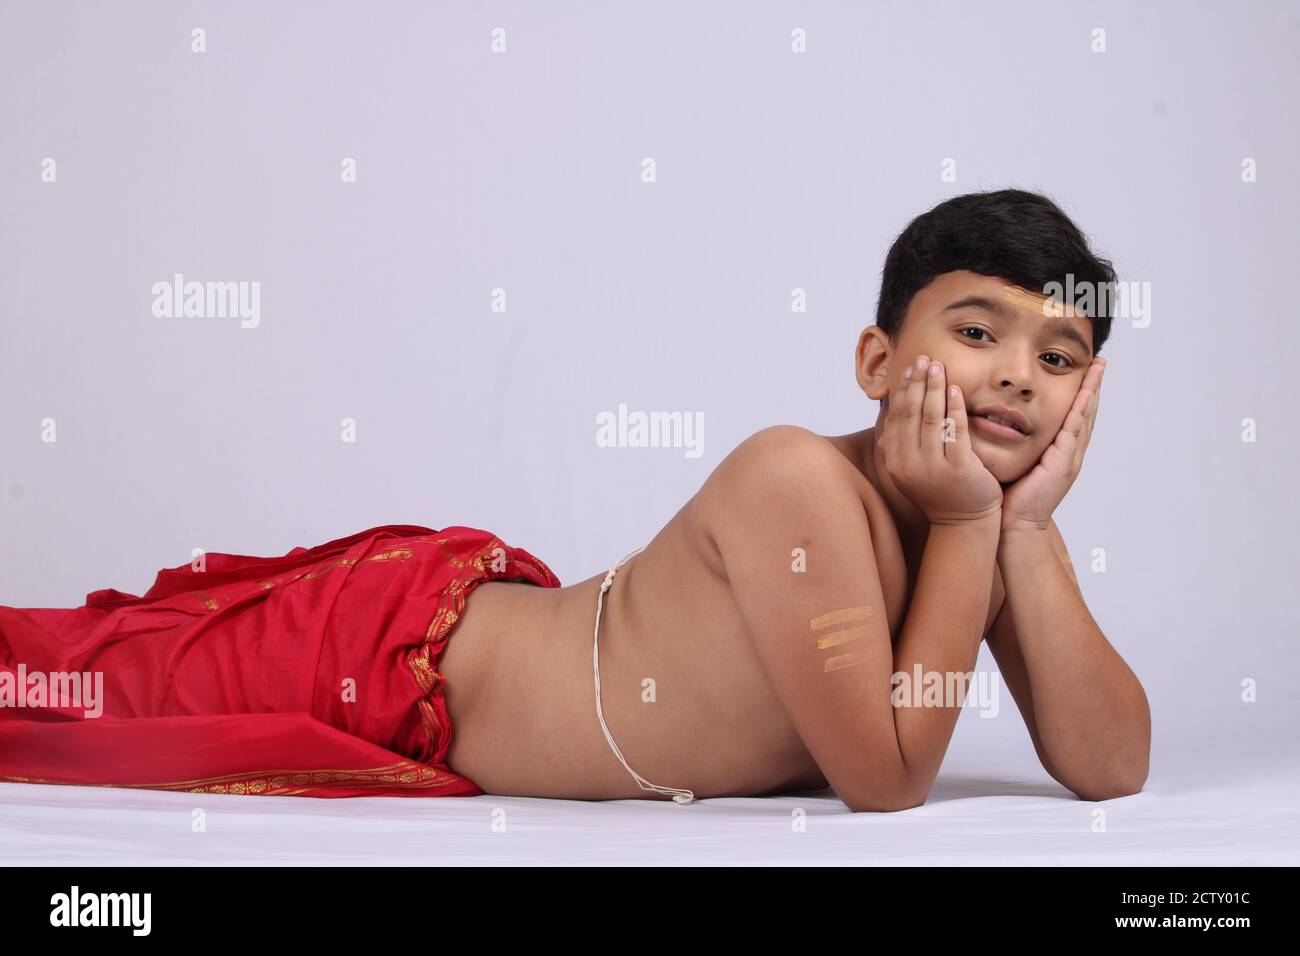 Young Indian boy in ethnic wear laying or enjoying leisure time over white background. Stock Photo